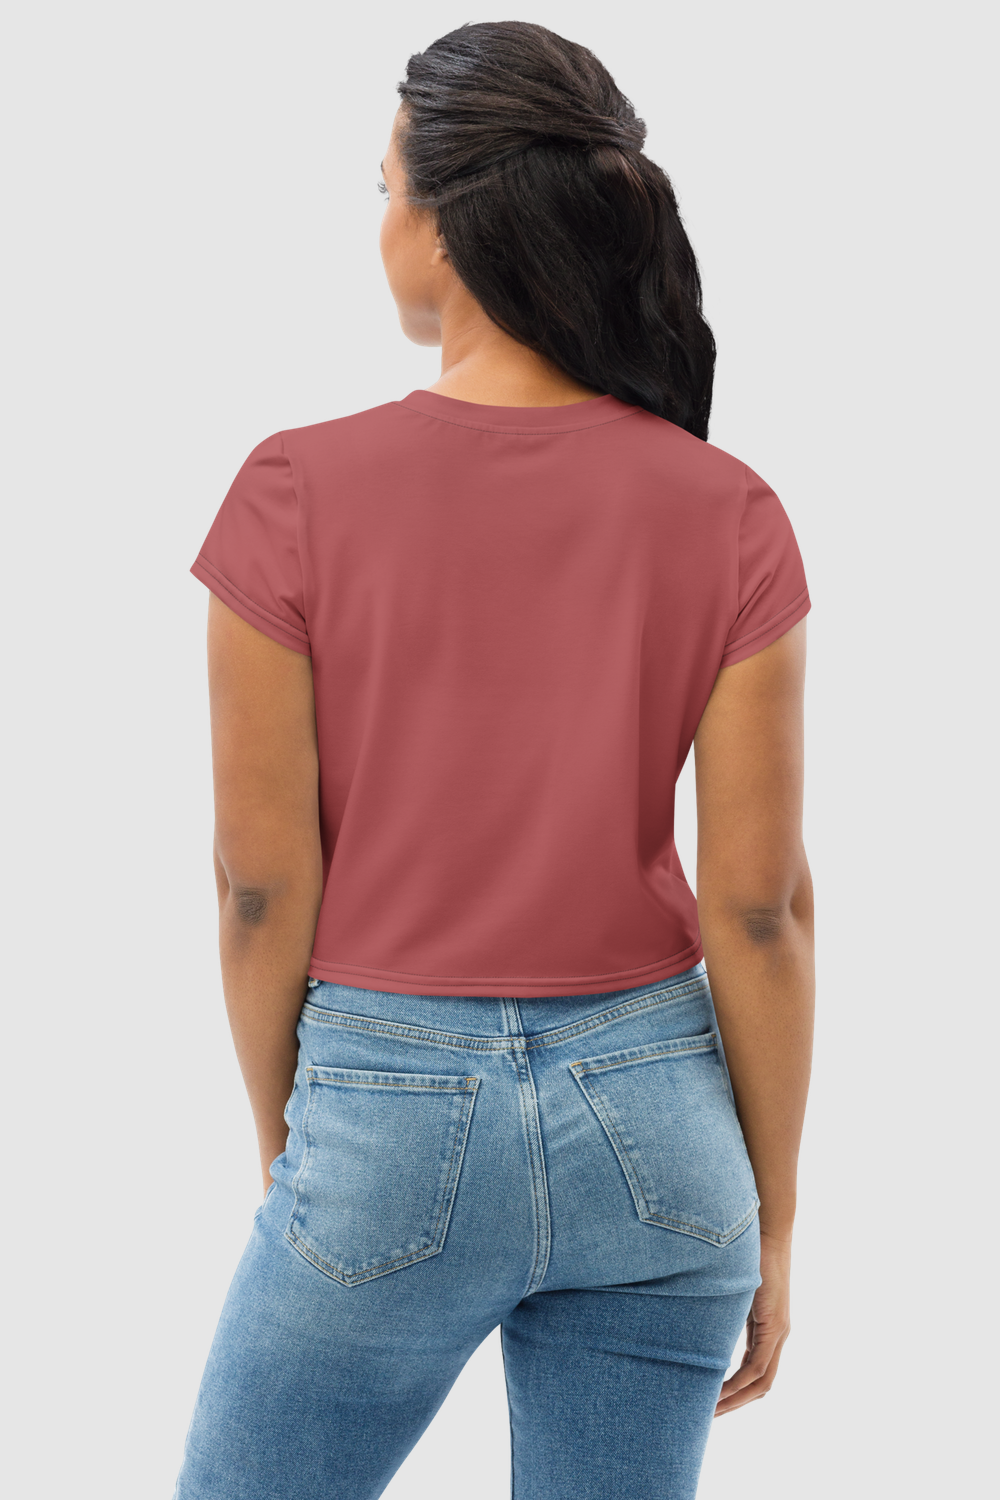 Mineral Red Women's Sublimated Crop Top T-Shirt